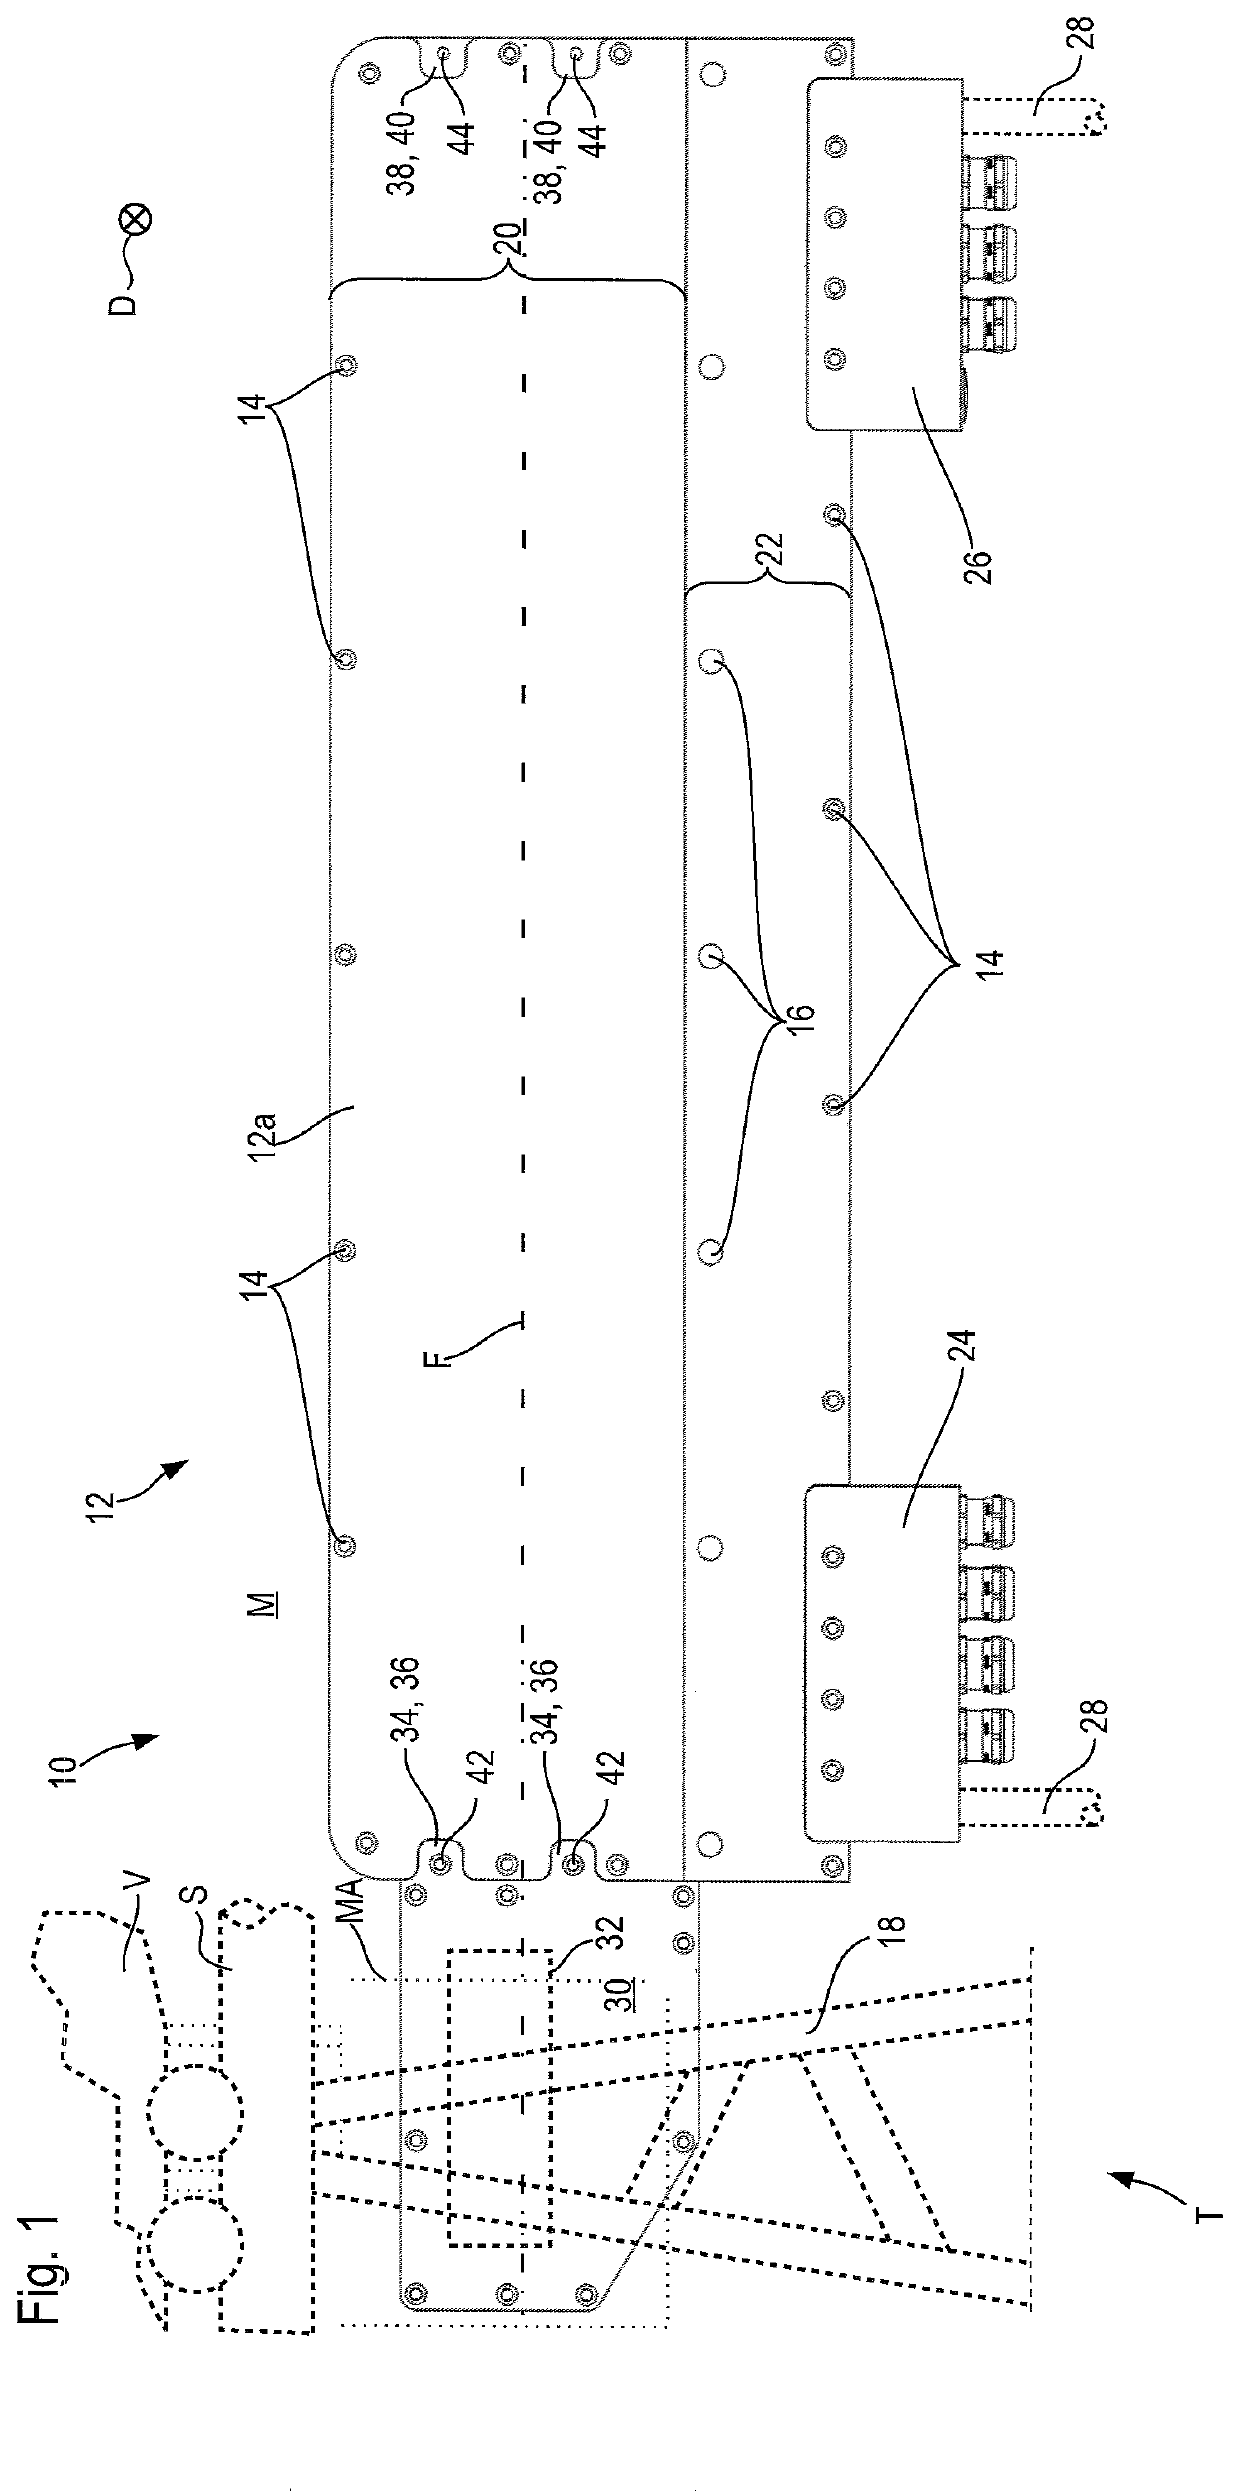 Winding arrangement for a linear motor with coil pairs arranged in parallel made from a continuous electrical conductor